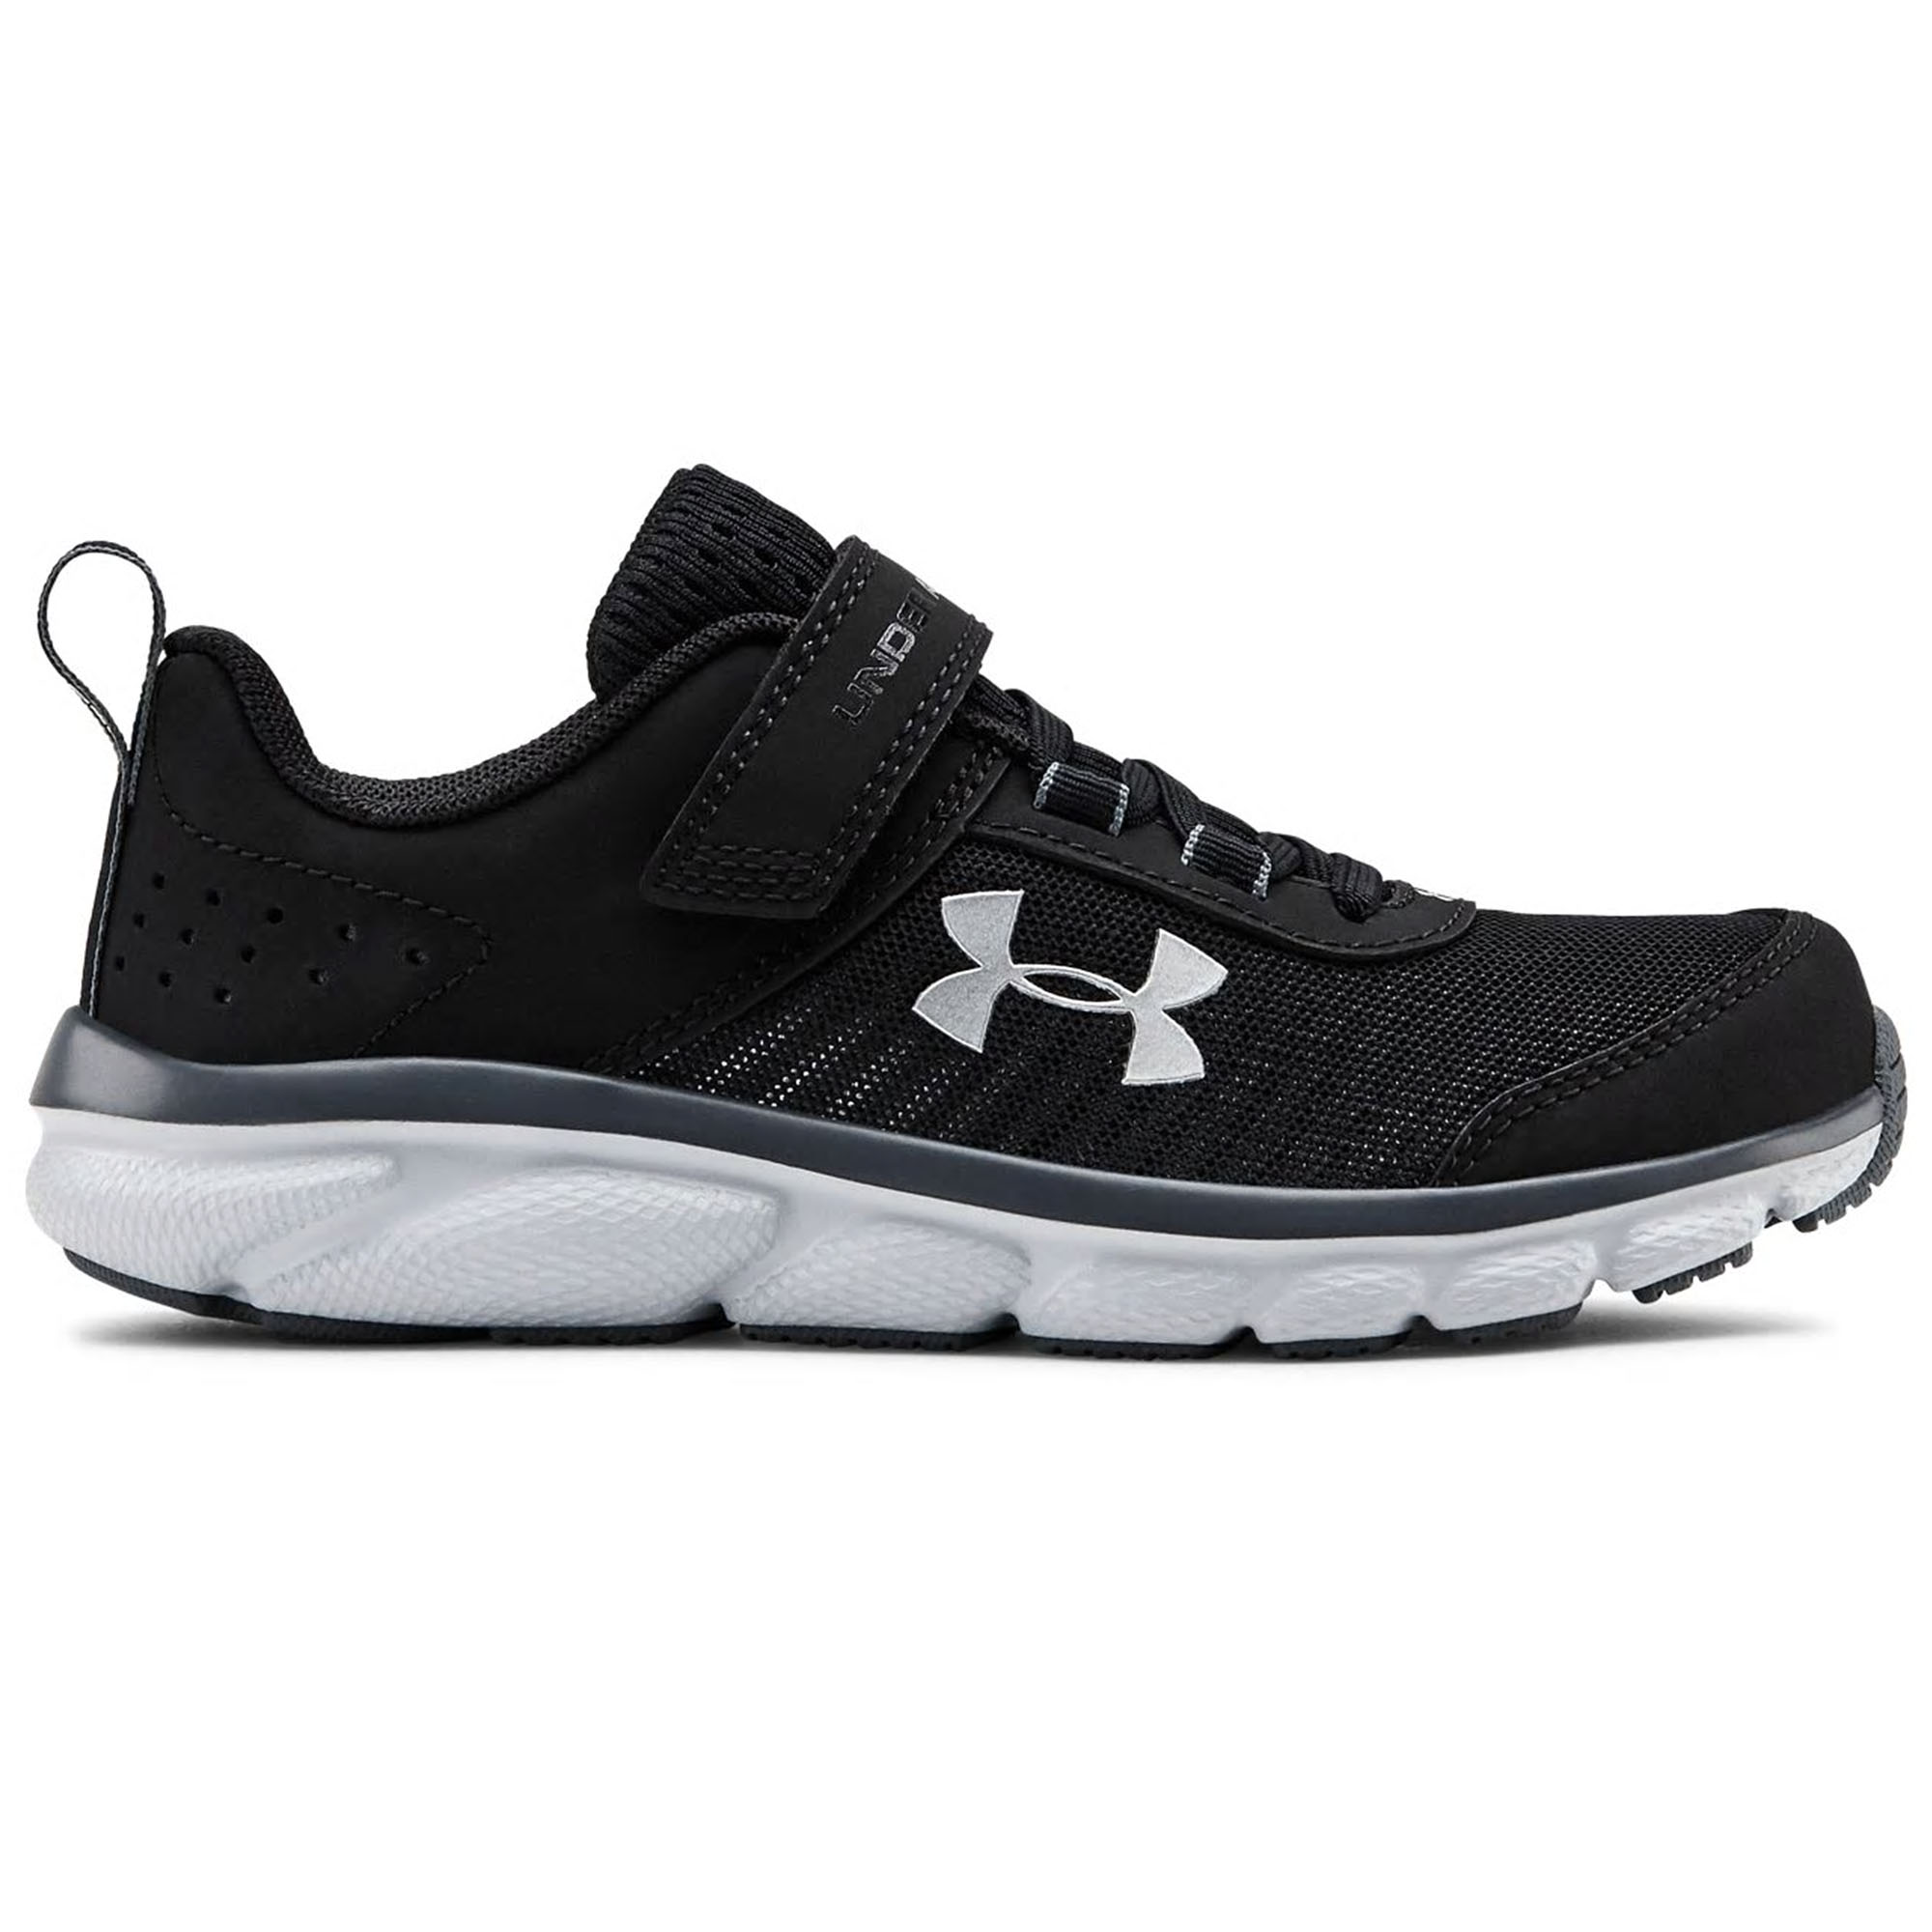 under armour running shoes for kids